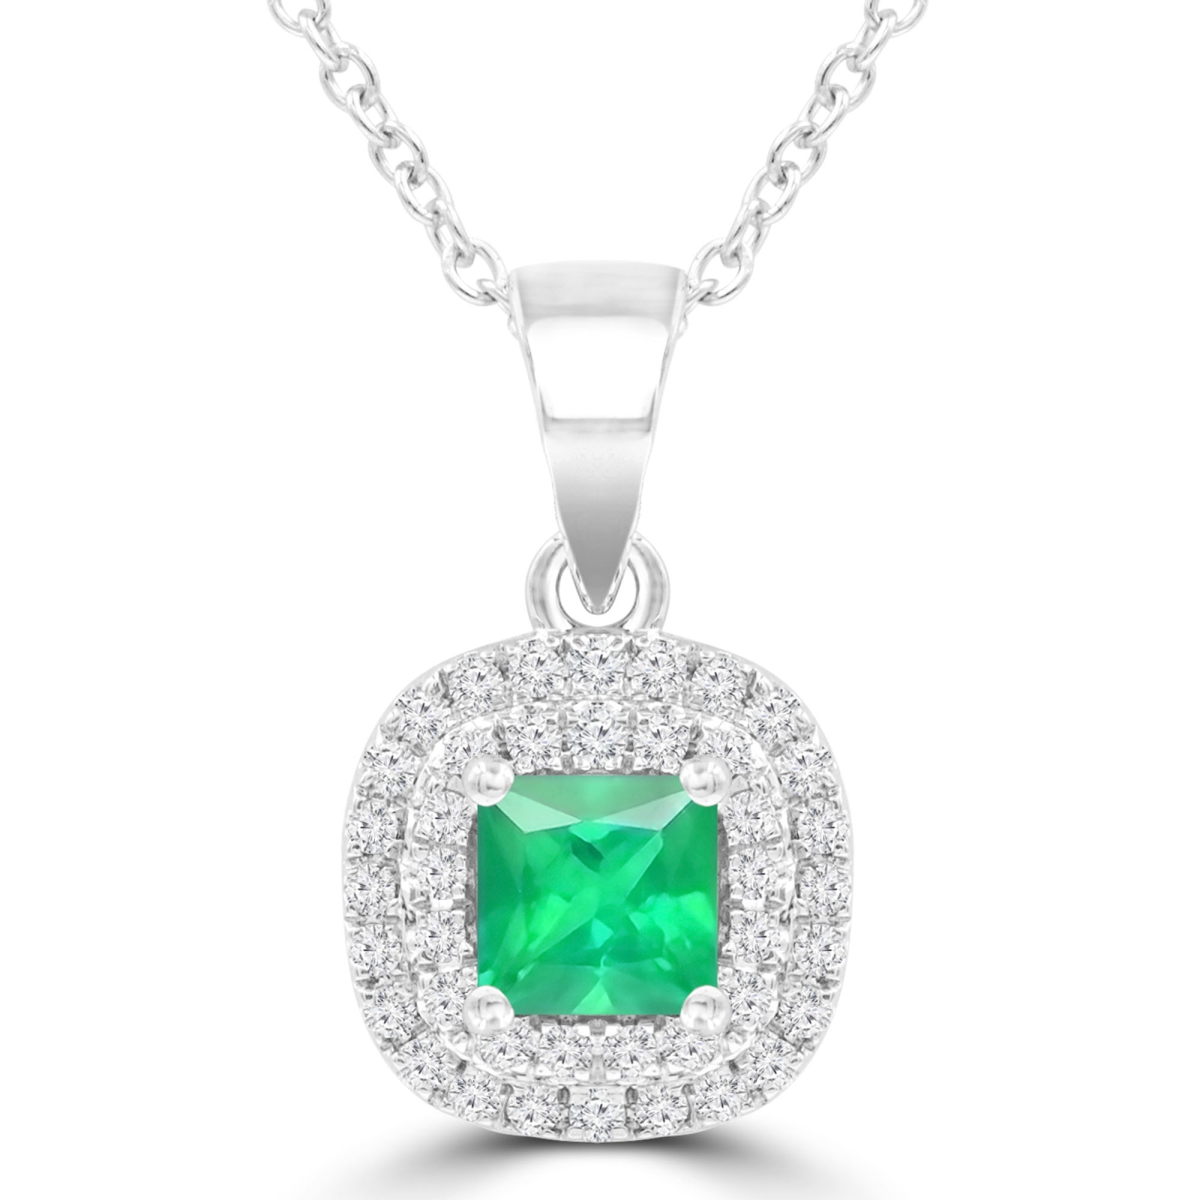 Picture of Majesty Diamonds MDR220160 0.4 CTW Princess Green Emerald Double Cushion Halo Pendant Necklace in 14K White Gold